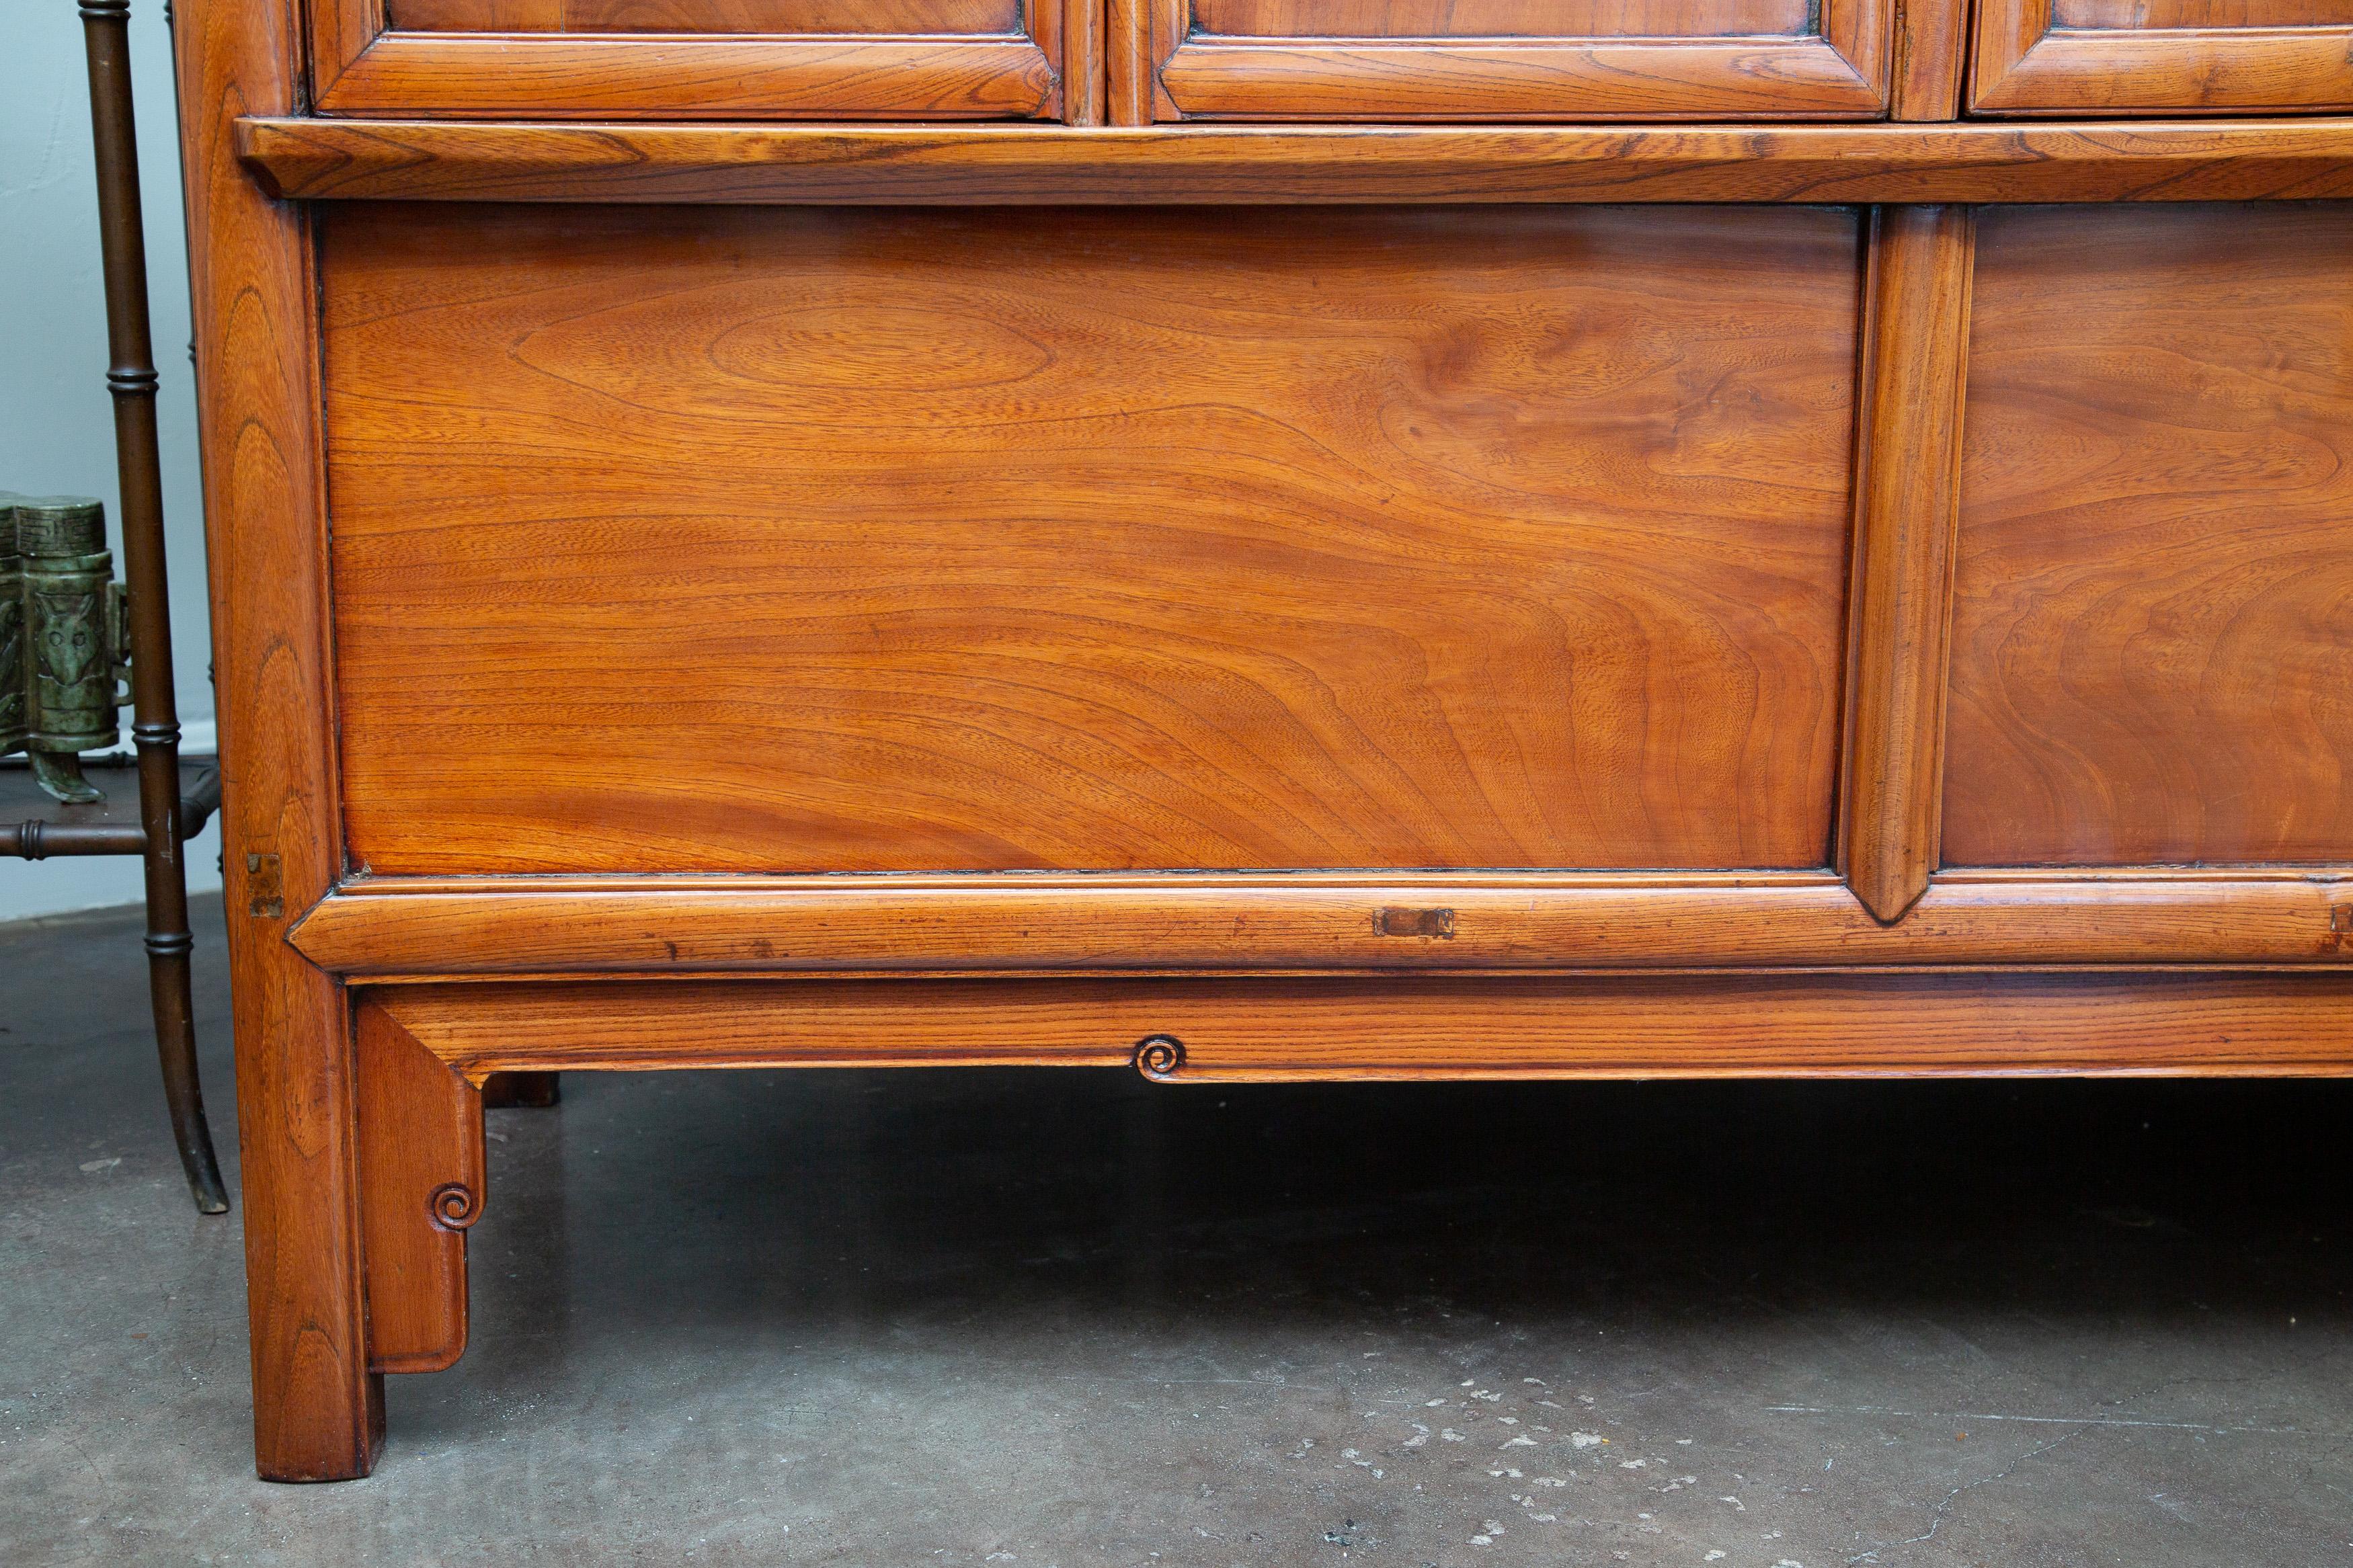 This is an imposing Chinese elm cabinet, with a warm, mellow welcoming patina, contradicting its size. The cabinet contains four long, narrow doors that open to reveal shelving and drawers.